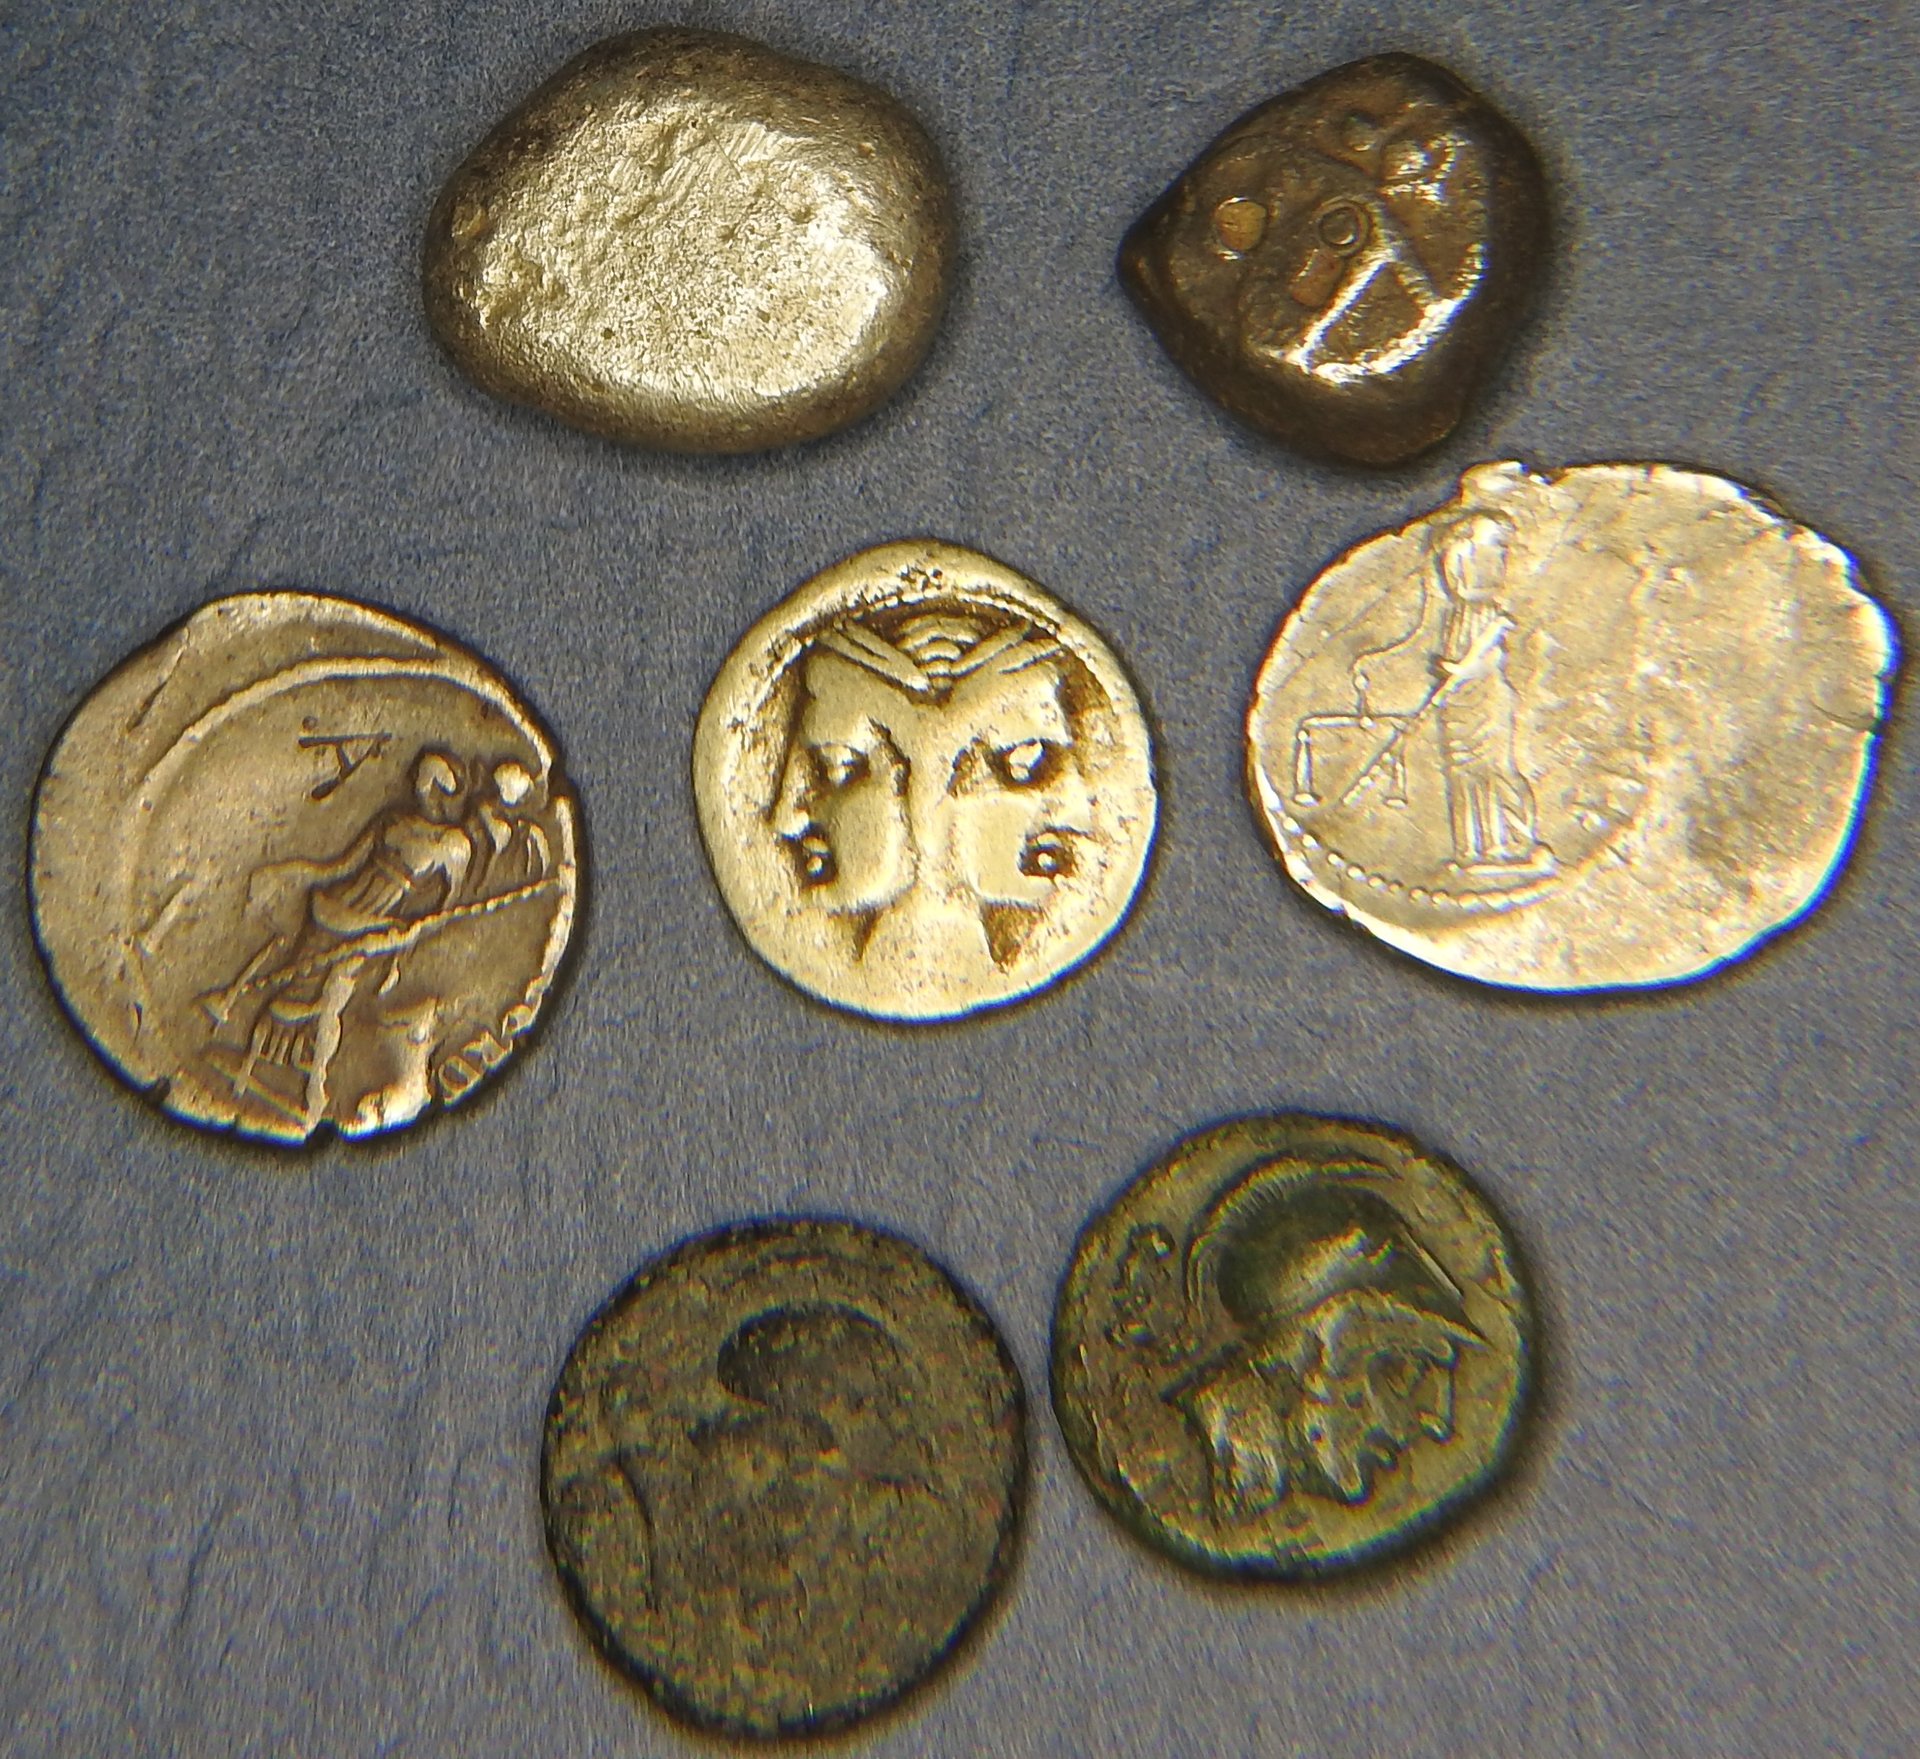 DSCN1893 tna coins and scale rufus.JPG